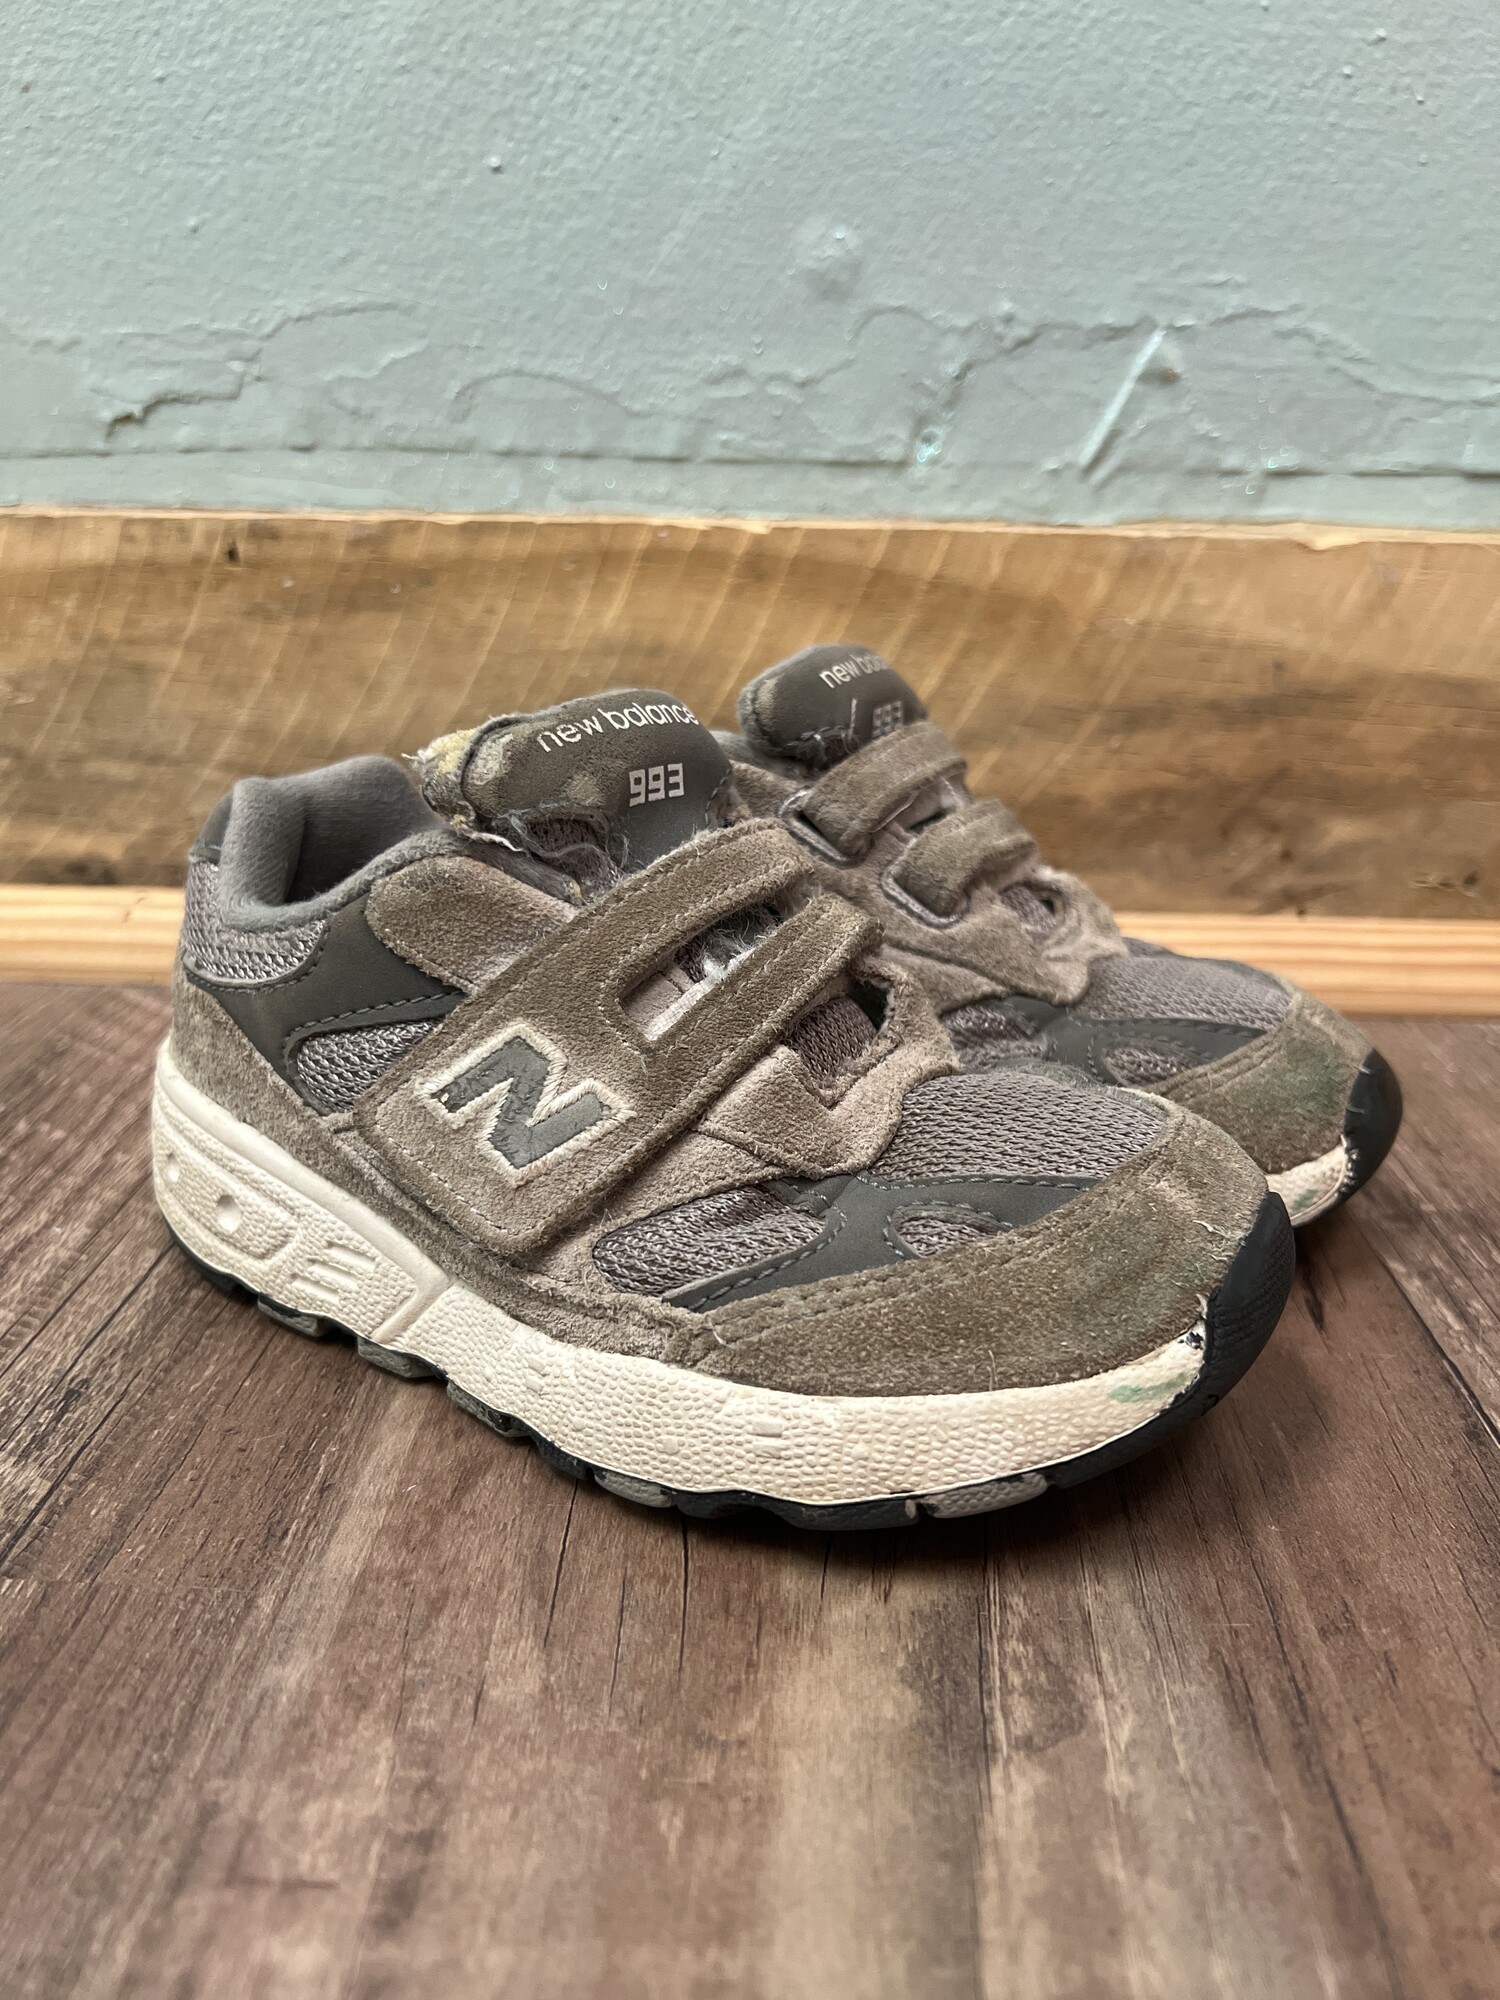 New Balance 933, Gray, Size: Shoes 9/toddler